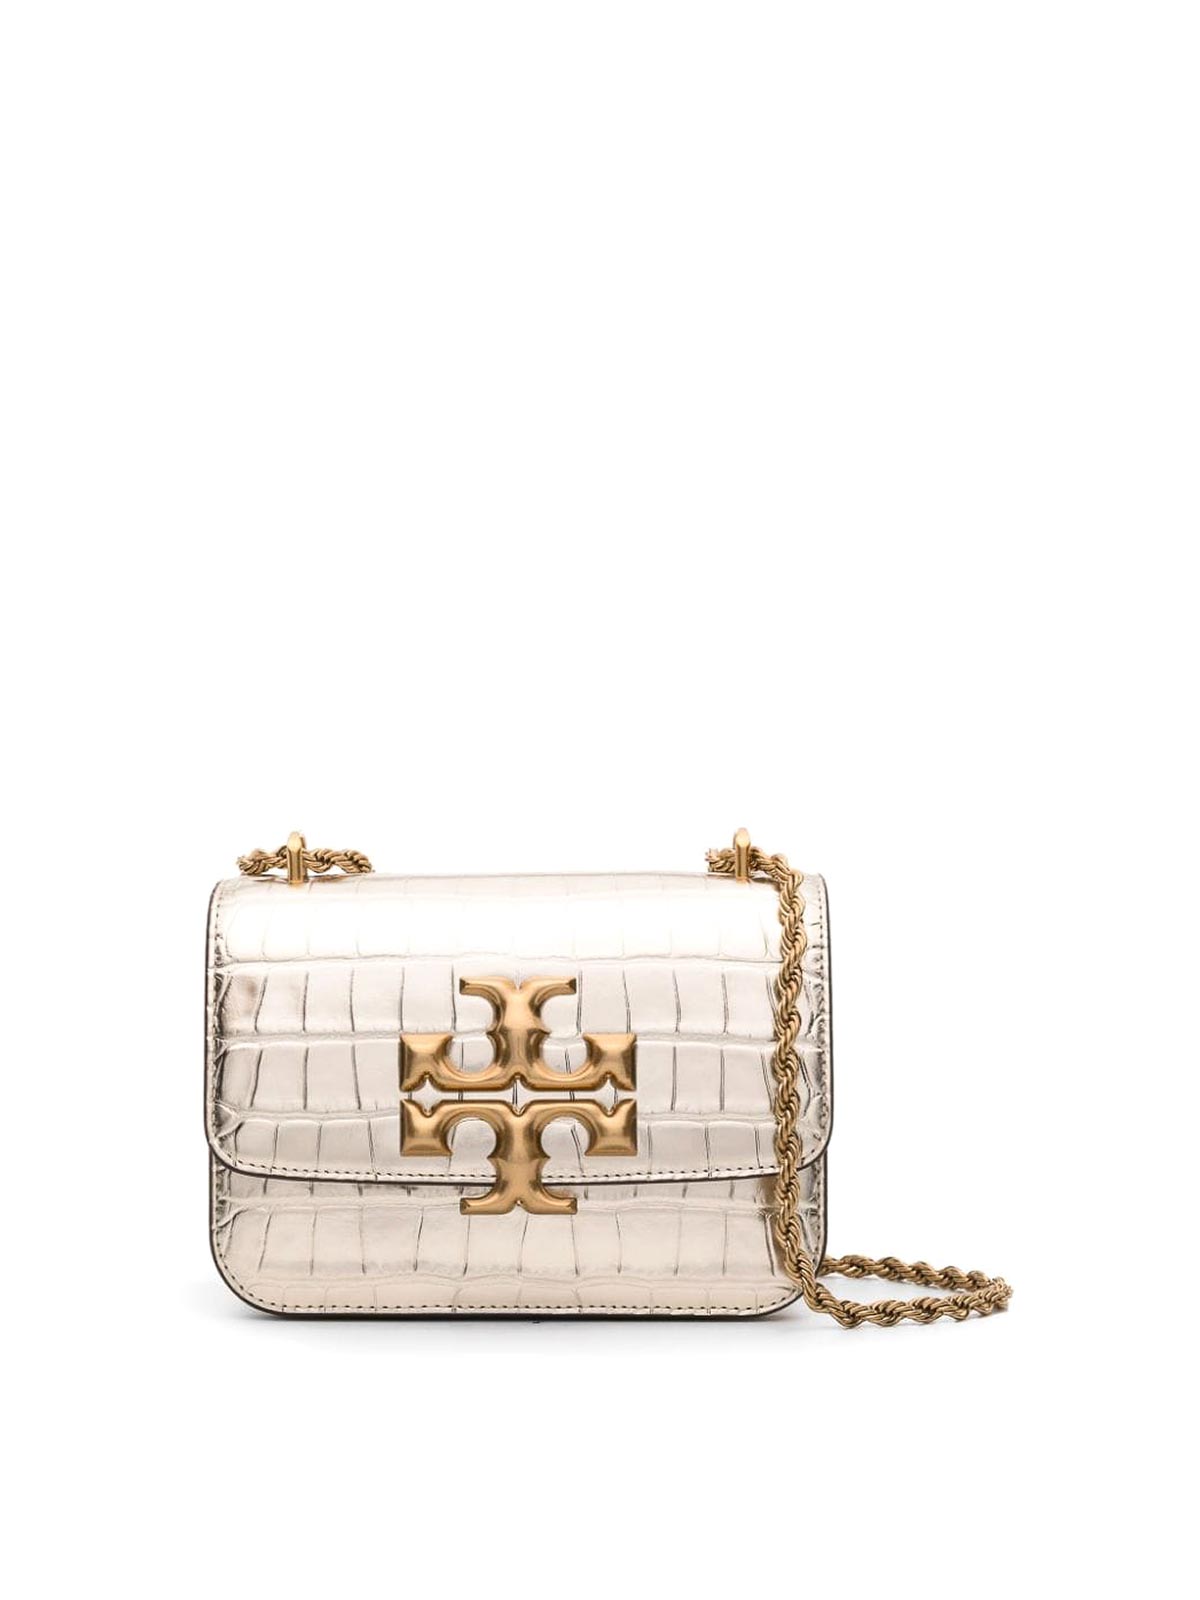 Tory Burch Eleanor Small Leather Shoulder Bag In Silver